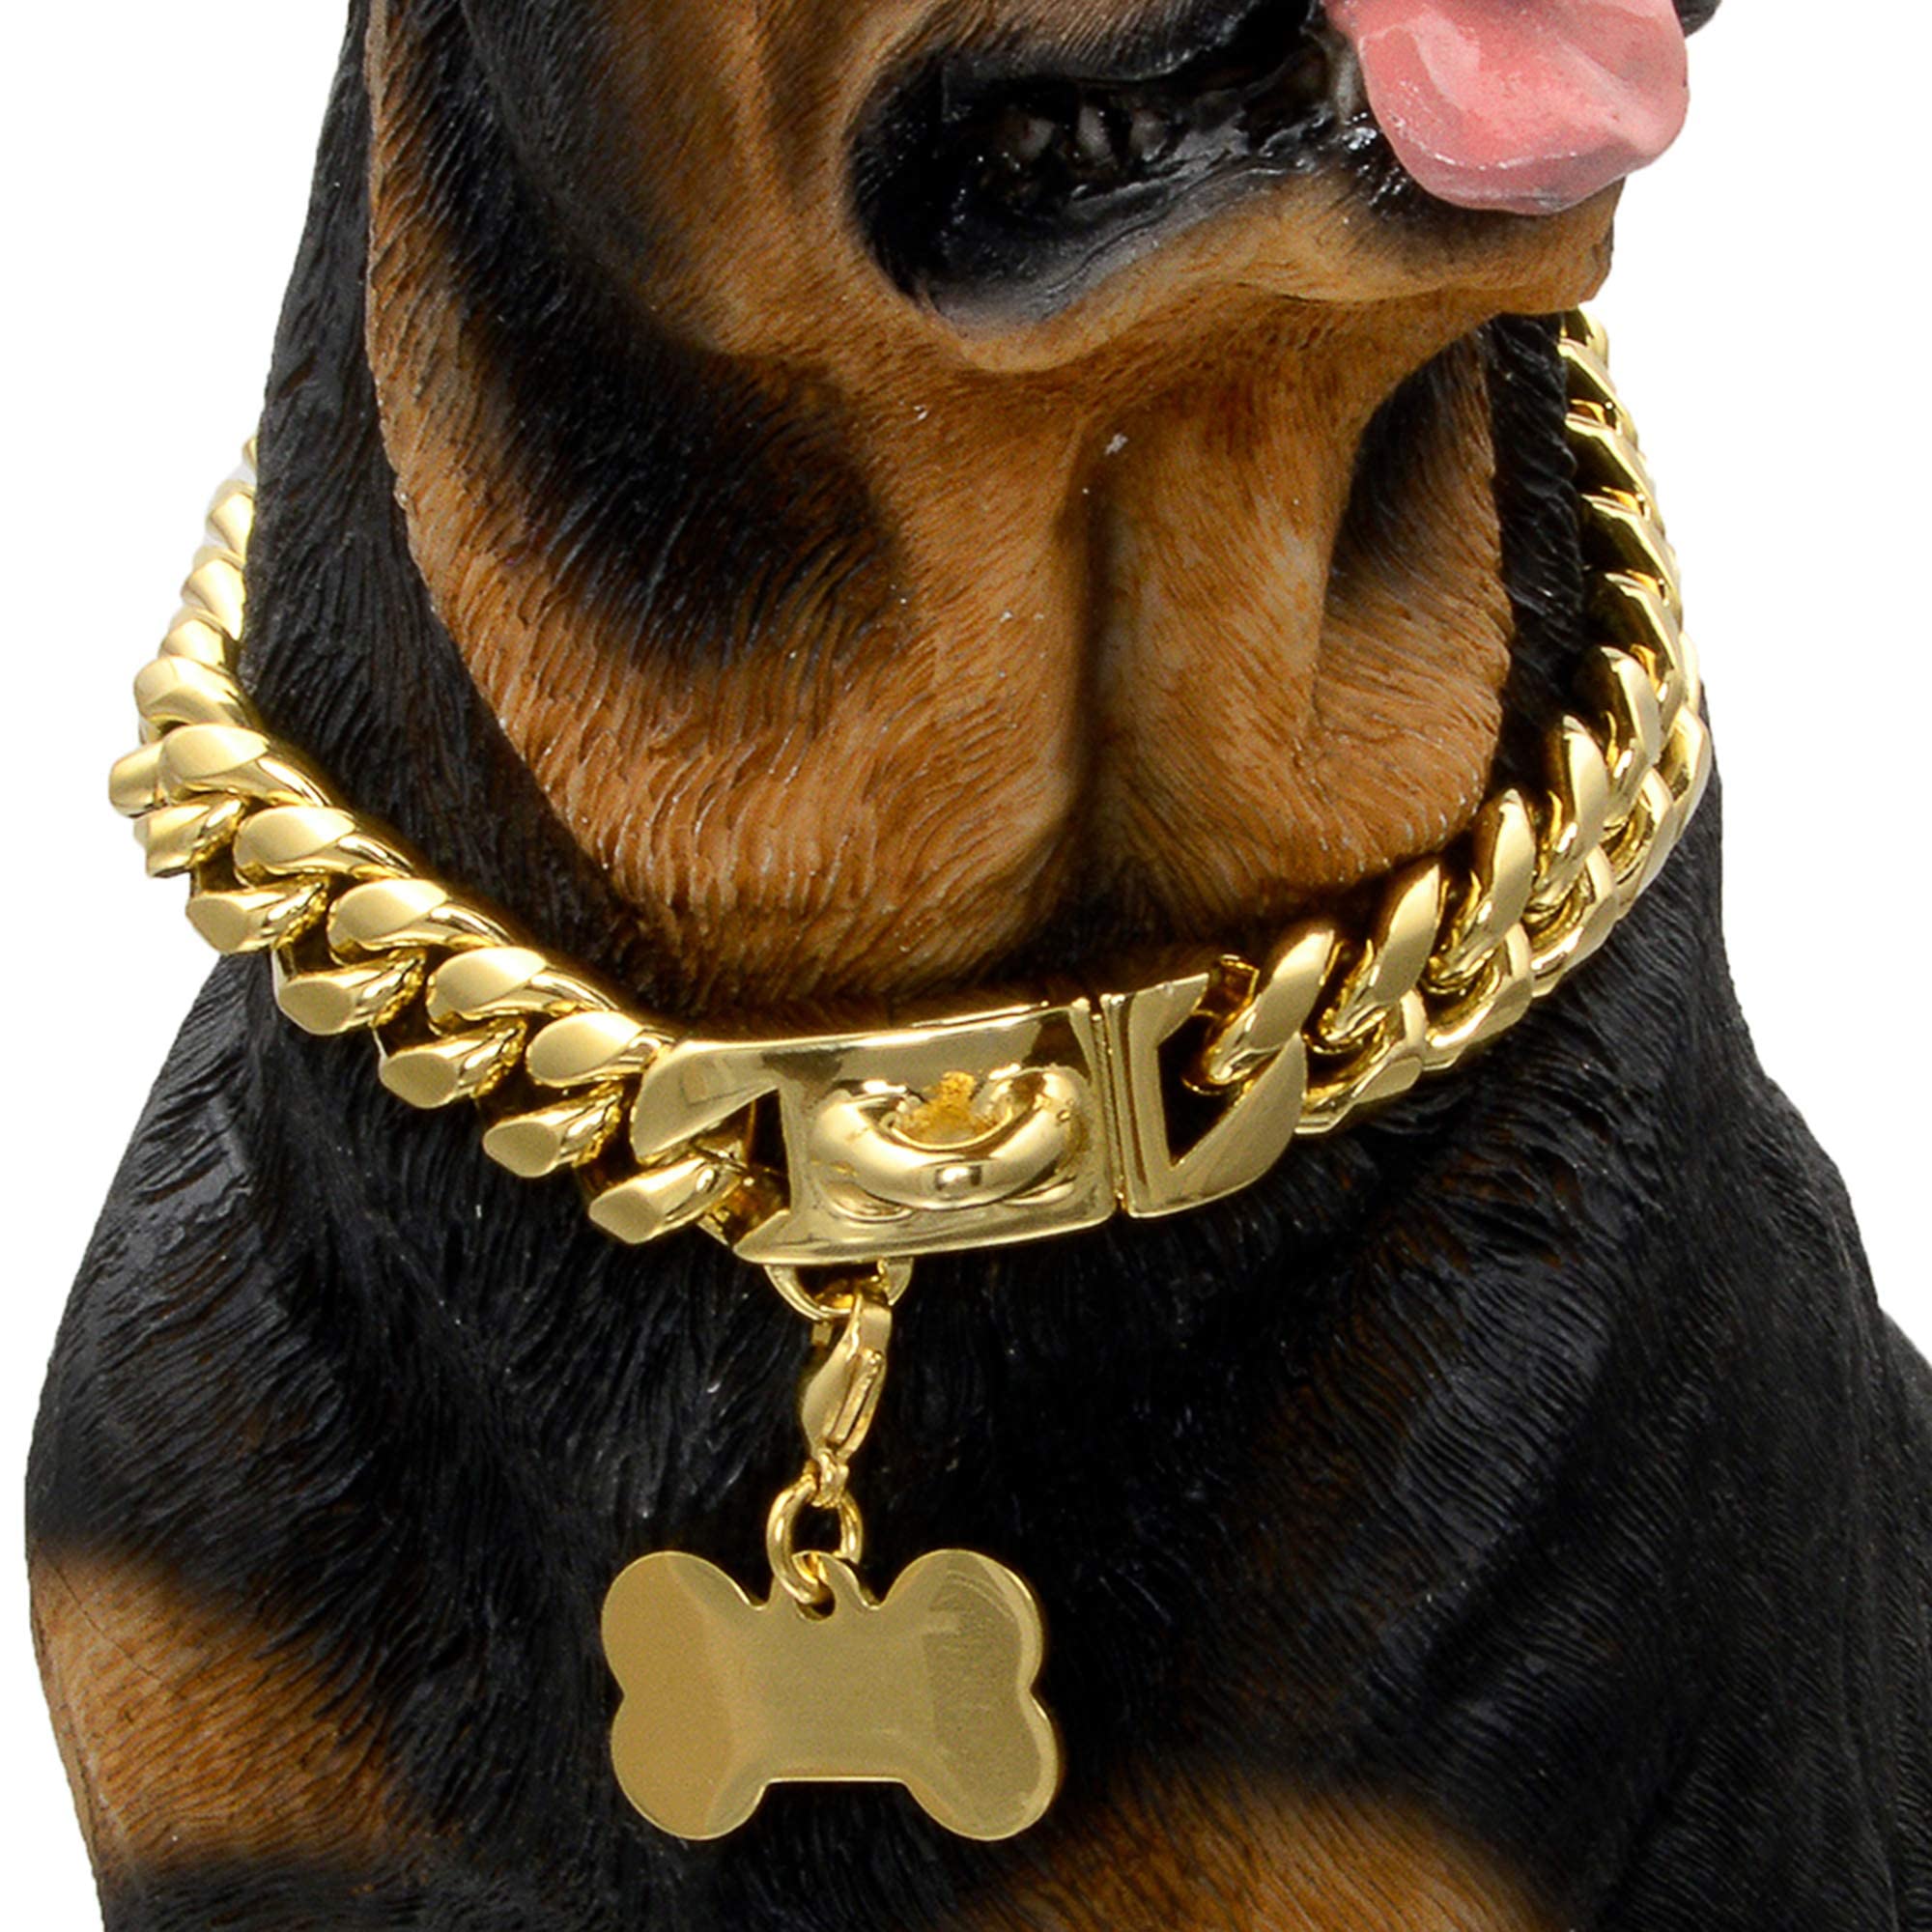 W/W Lifetime gold Dog chain collar Walking Metal chain collar with Design Secure Buckle,18K cuban Link Strong Heavy Duty chew Proof for Mediu